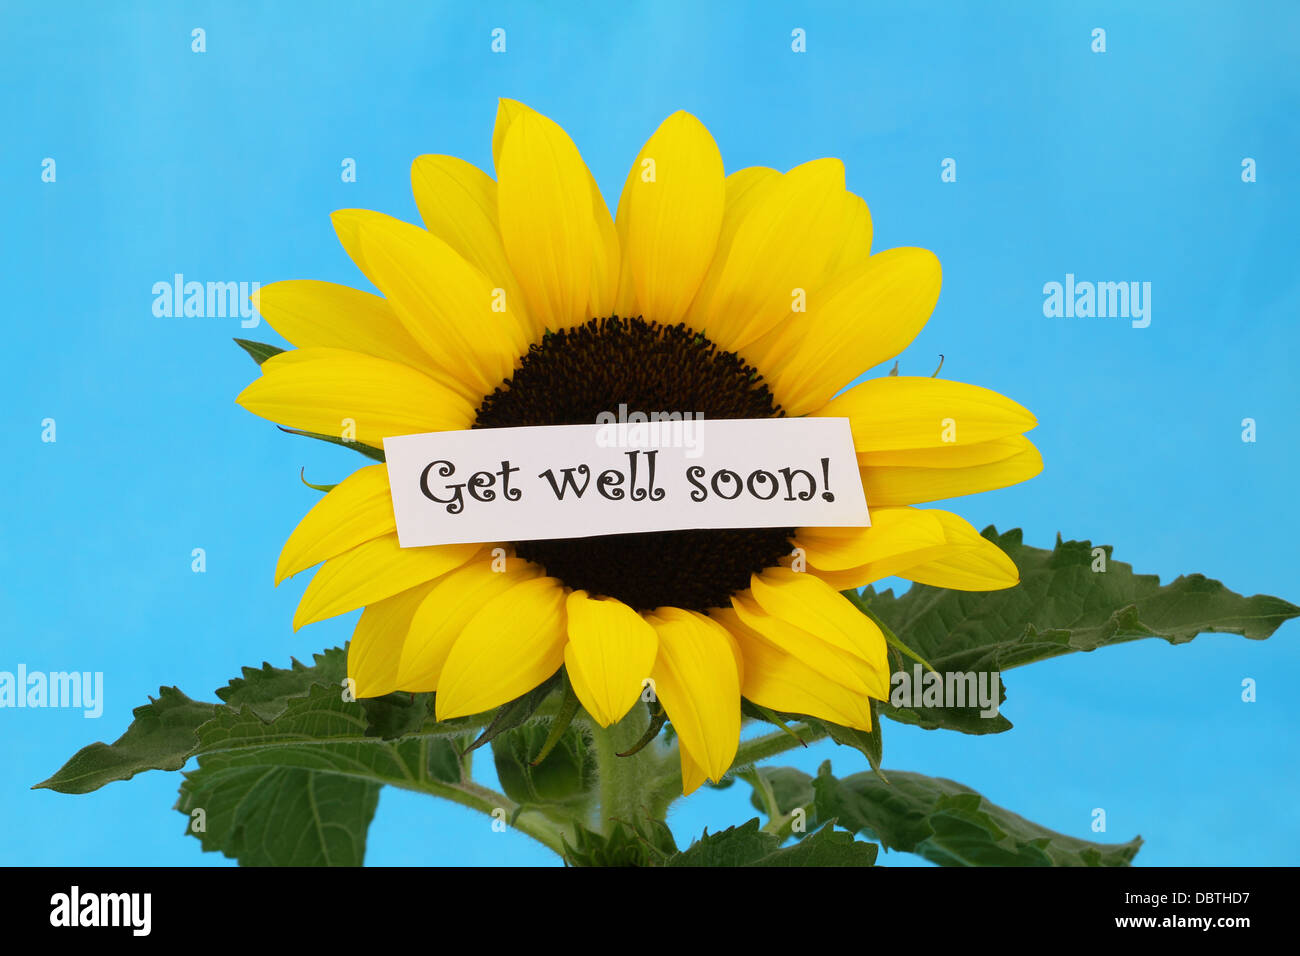 Get well soon note on sunflower Stock Photo